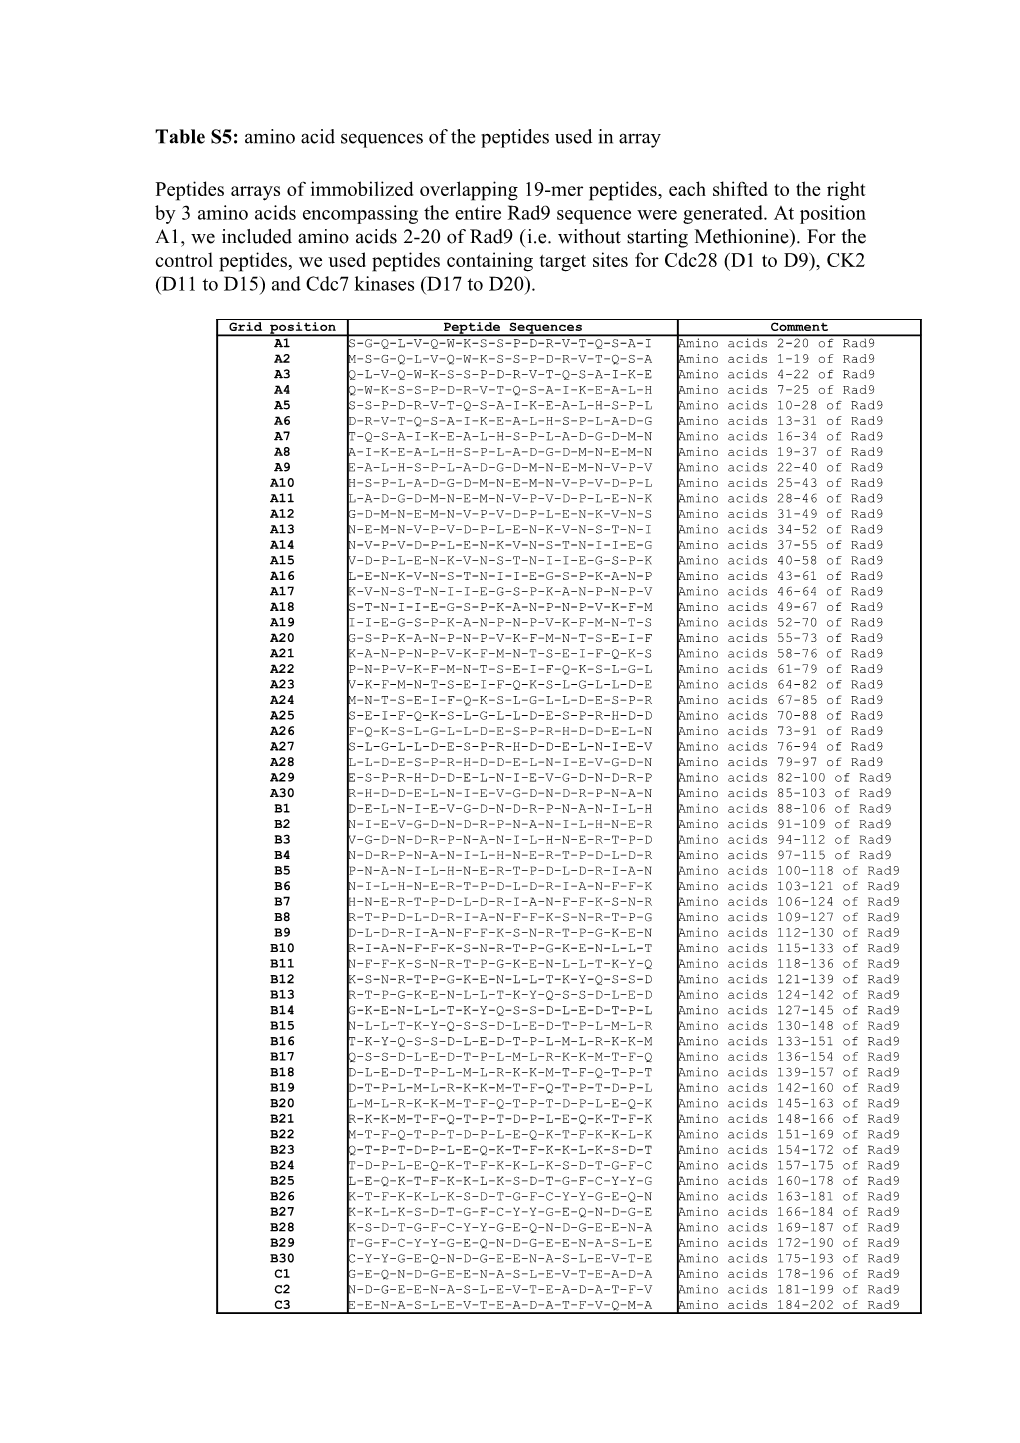 Table S5: Amino Acid Sequences of the Peptides Used in Array